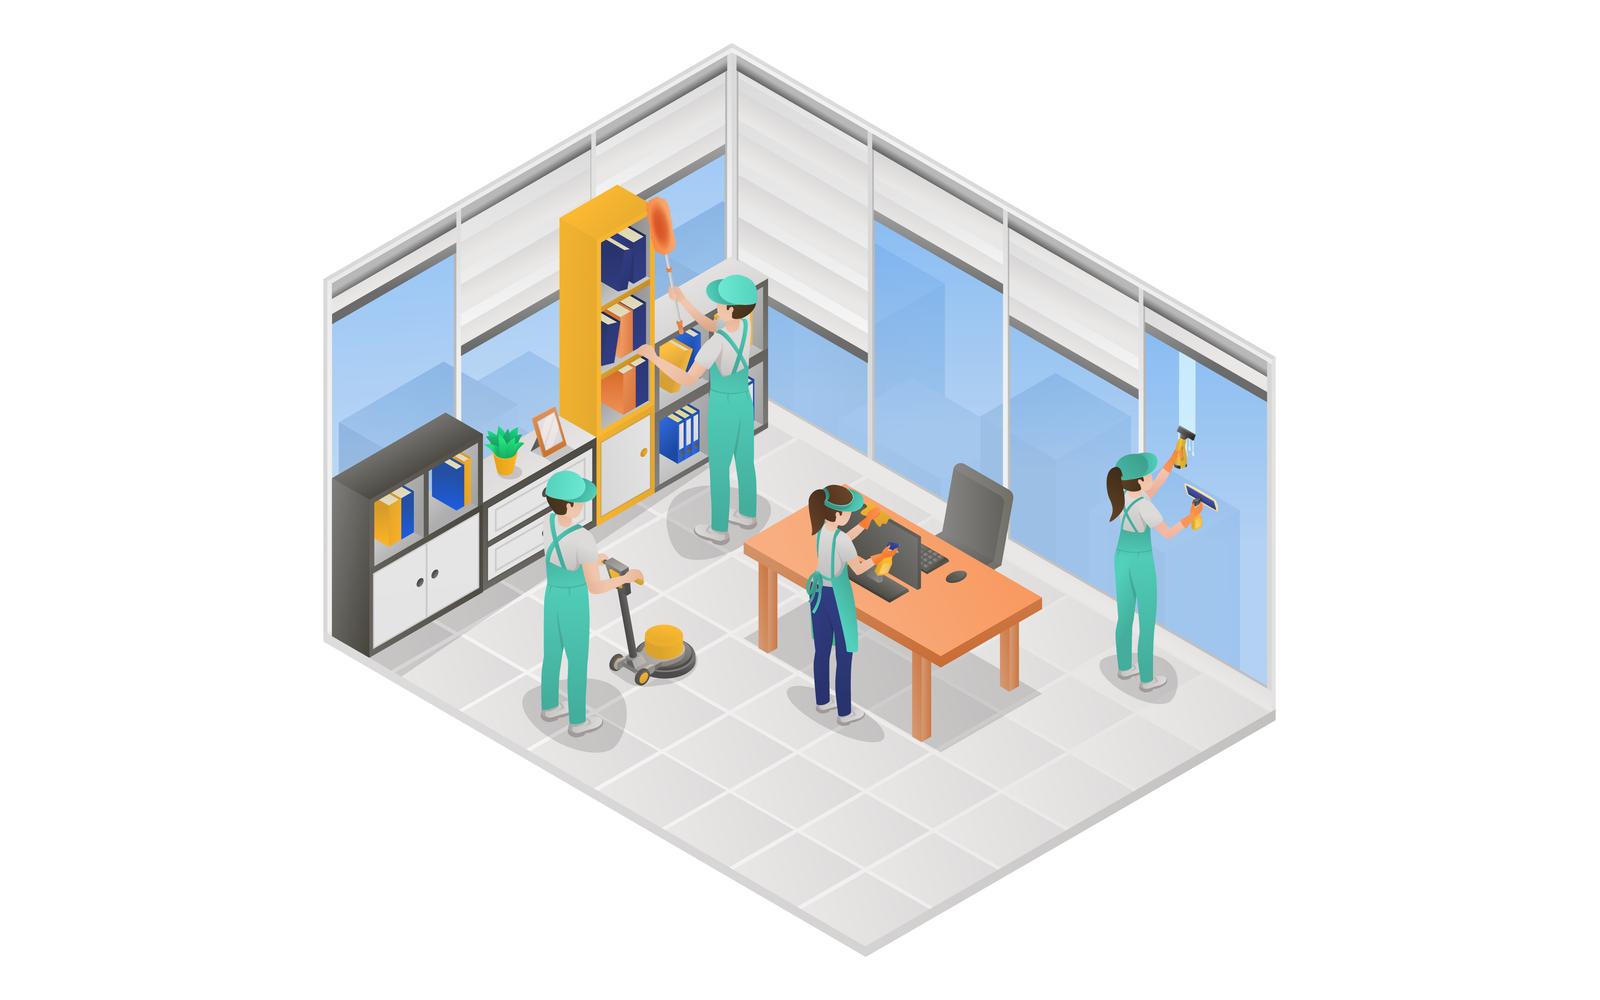 Professional Cleaning Service Isometric 7 Vector Illustration Concept